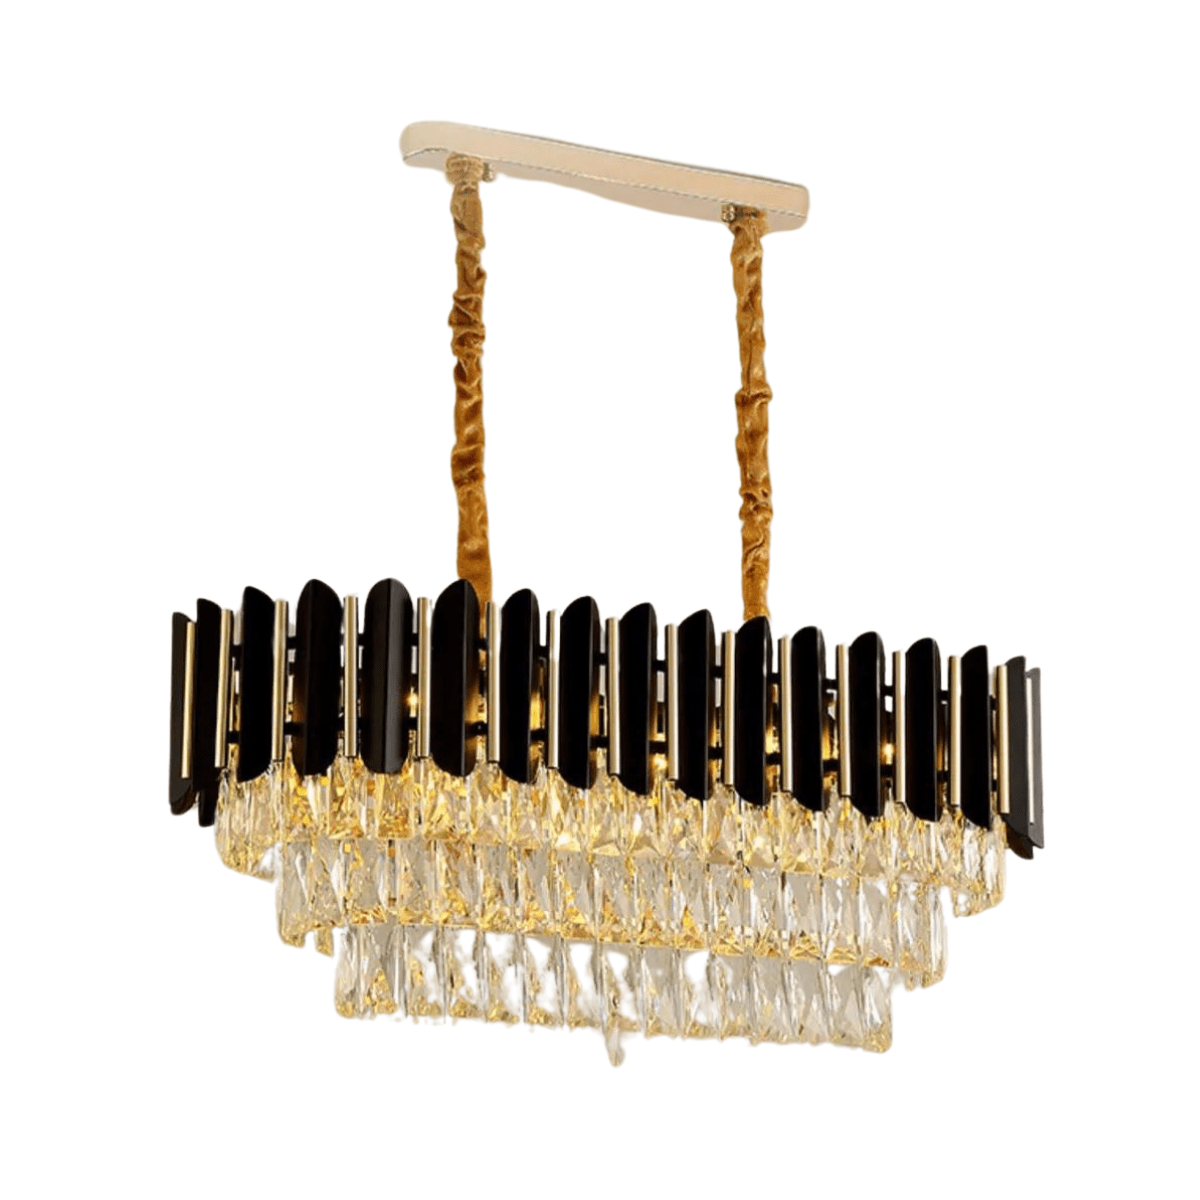 Buy Modern Oval LED Black Crystal Ceiling Pendant Chandelier 75cm - BH3011/OVAL-BK | Shop at Supply Master Accra, Ghana Lamps & Lightings Buy Tools hardware Building materials